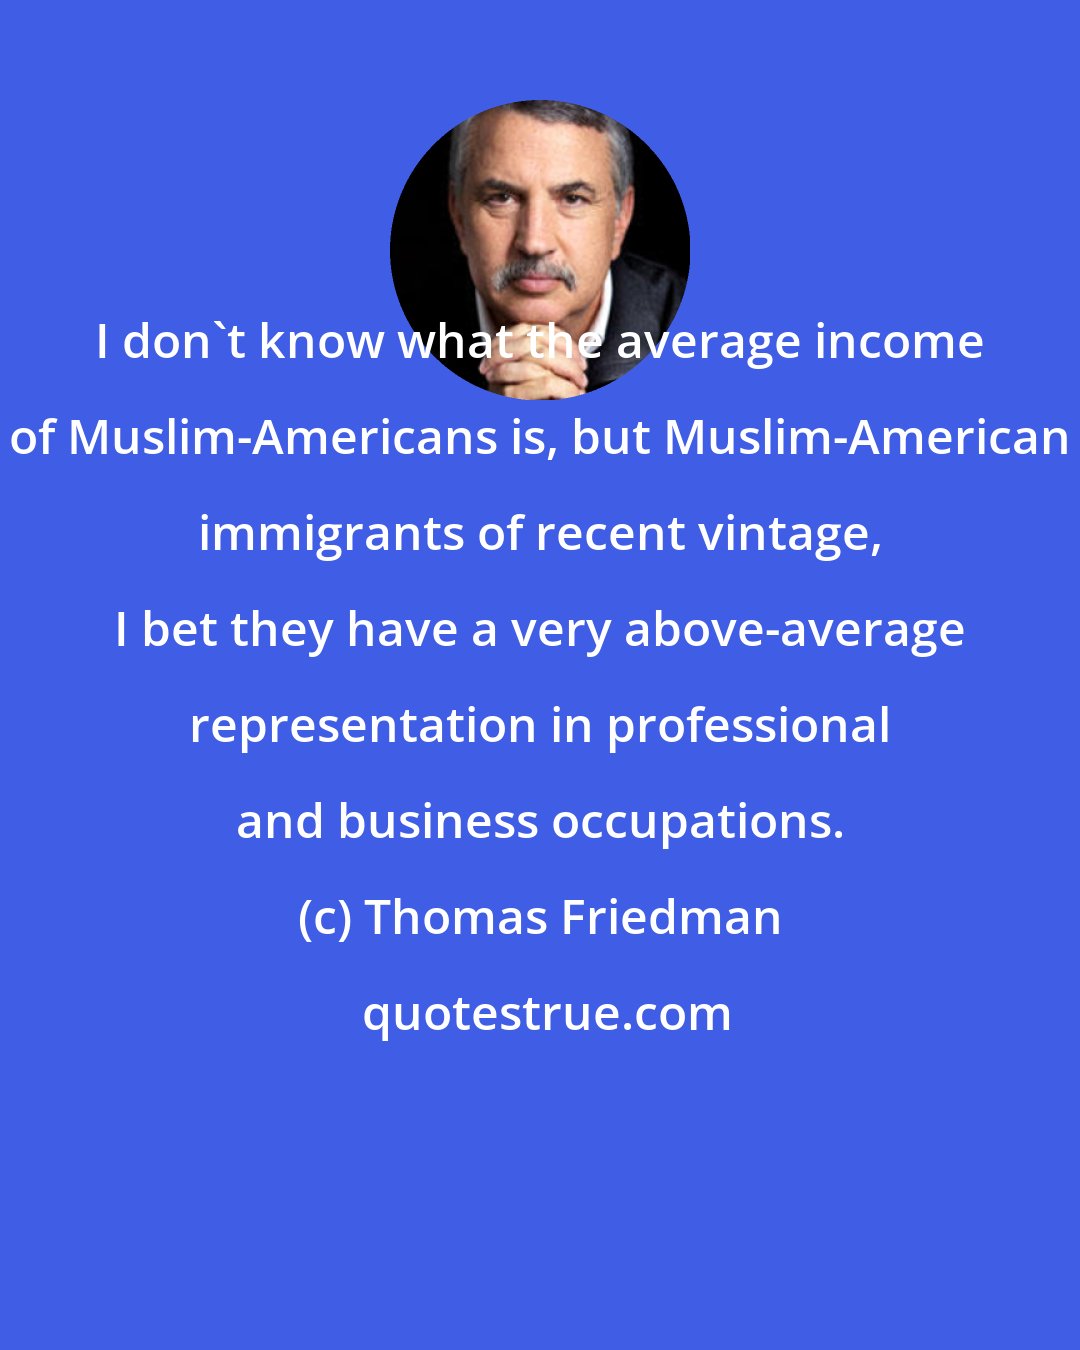 Thomas Friedman: I don't know what the average income of Muslim-Americans is, but Muslim-American immigrants of recent vintage, I bet they have a very above-average representation in professional and business occupations.